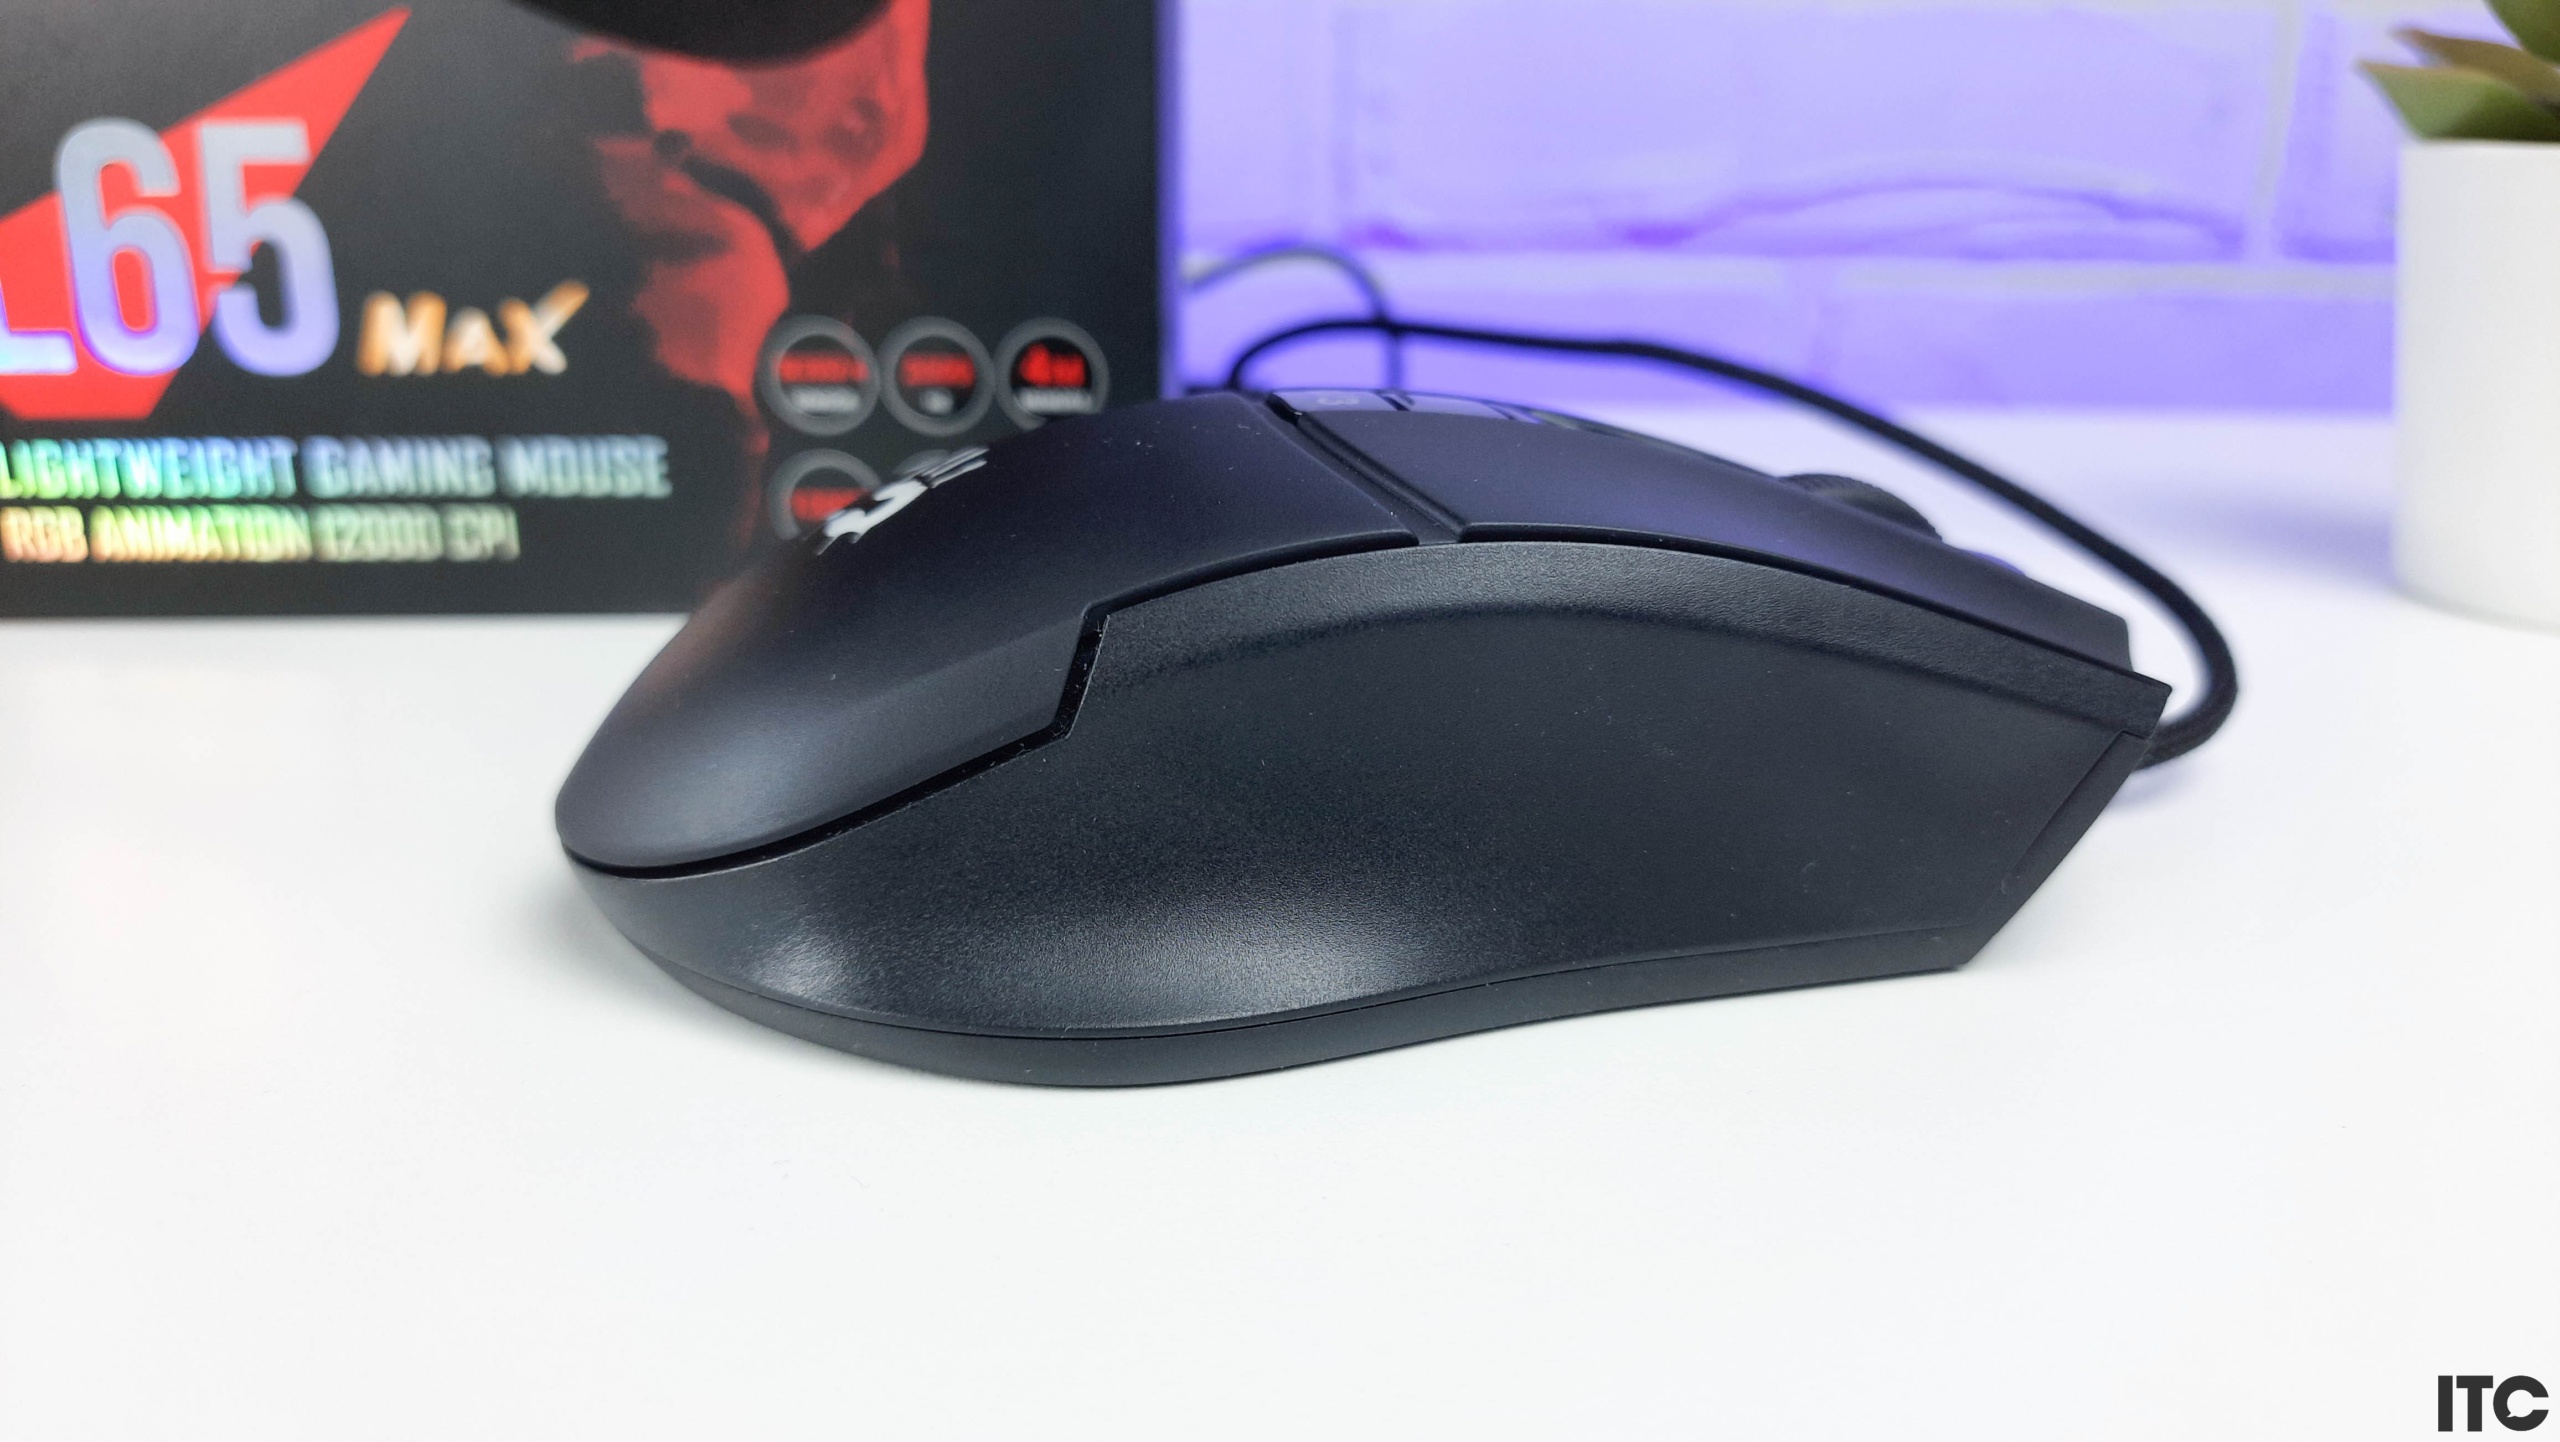 Blacklisted device bloody mouse a4tech rust решение фото 84